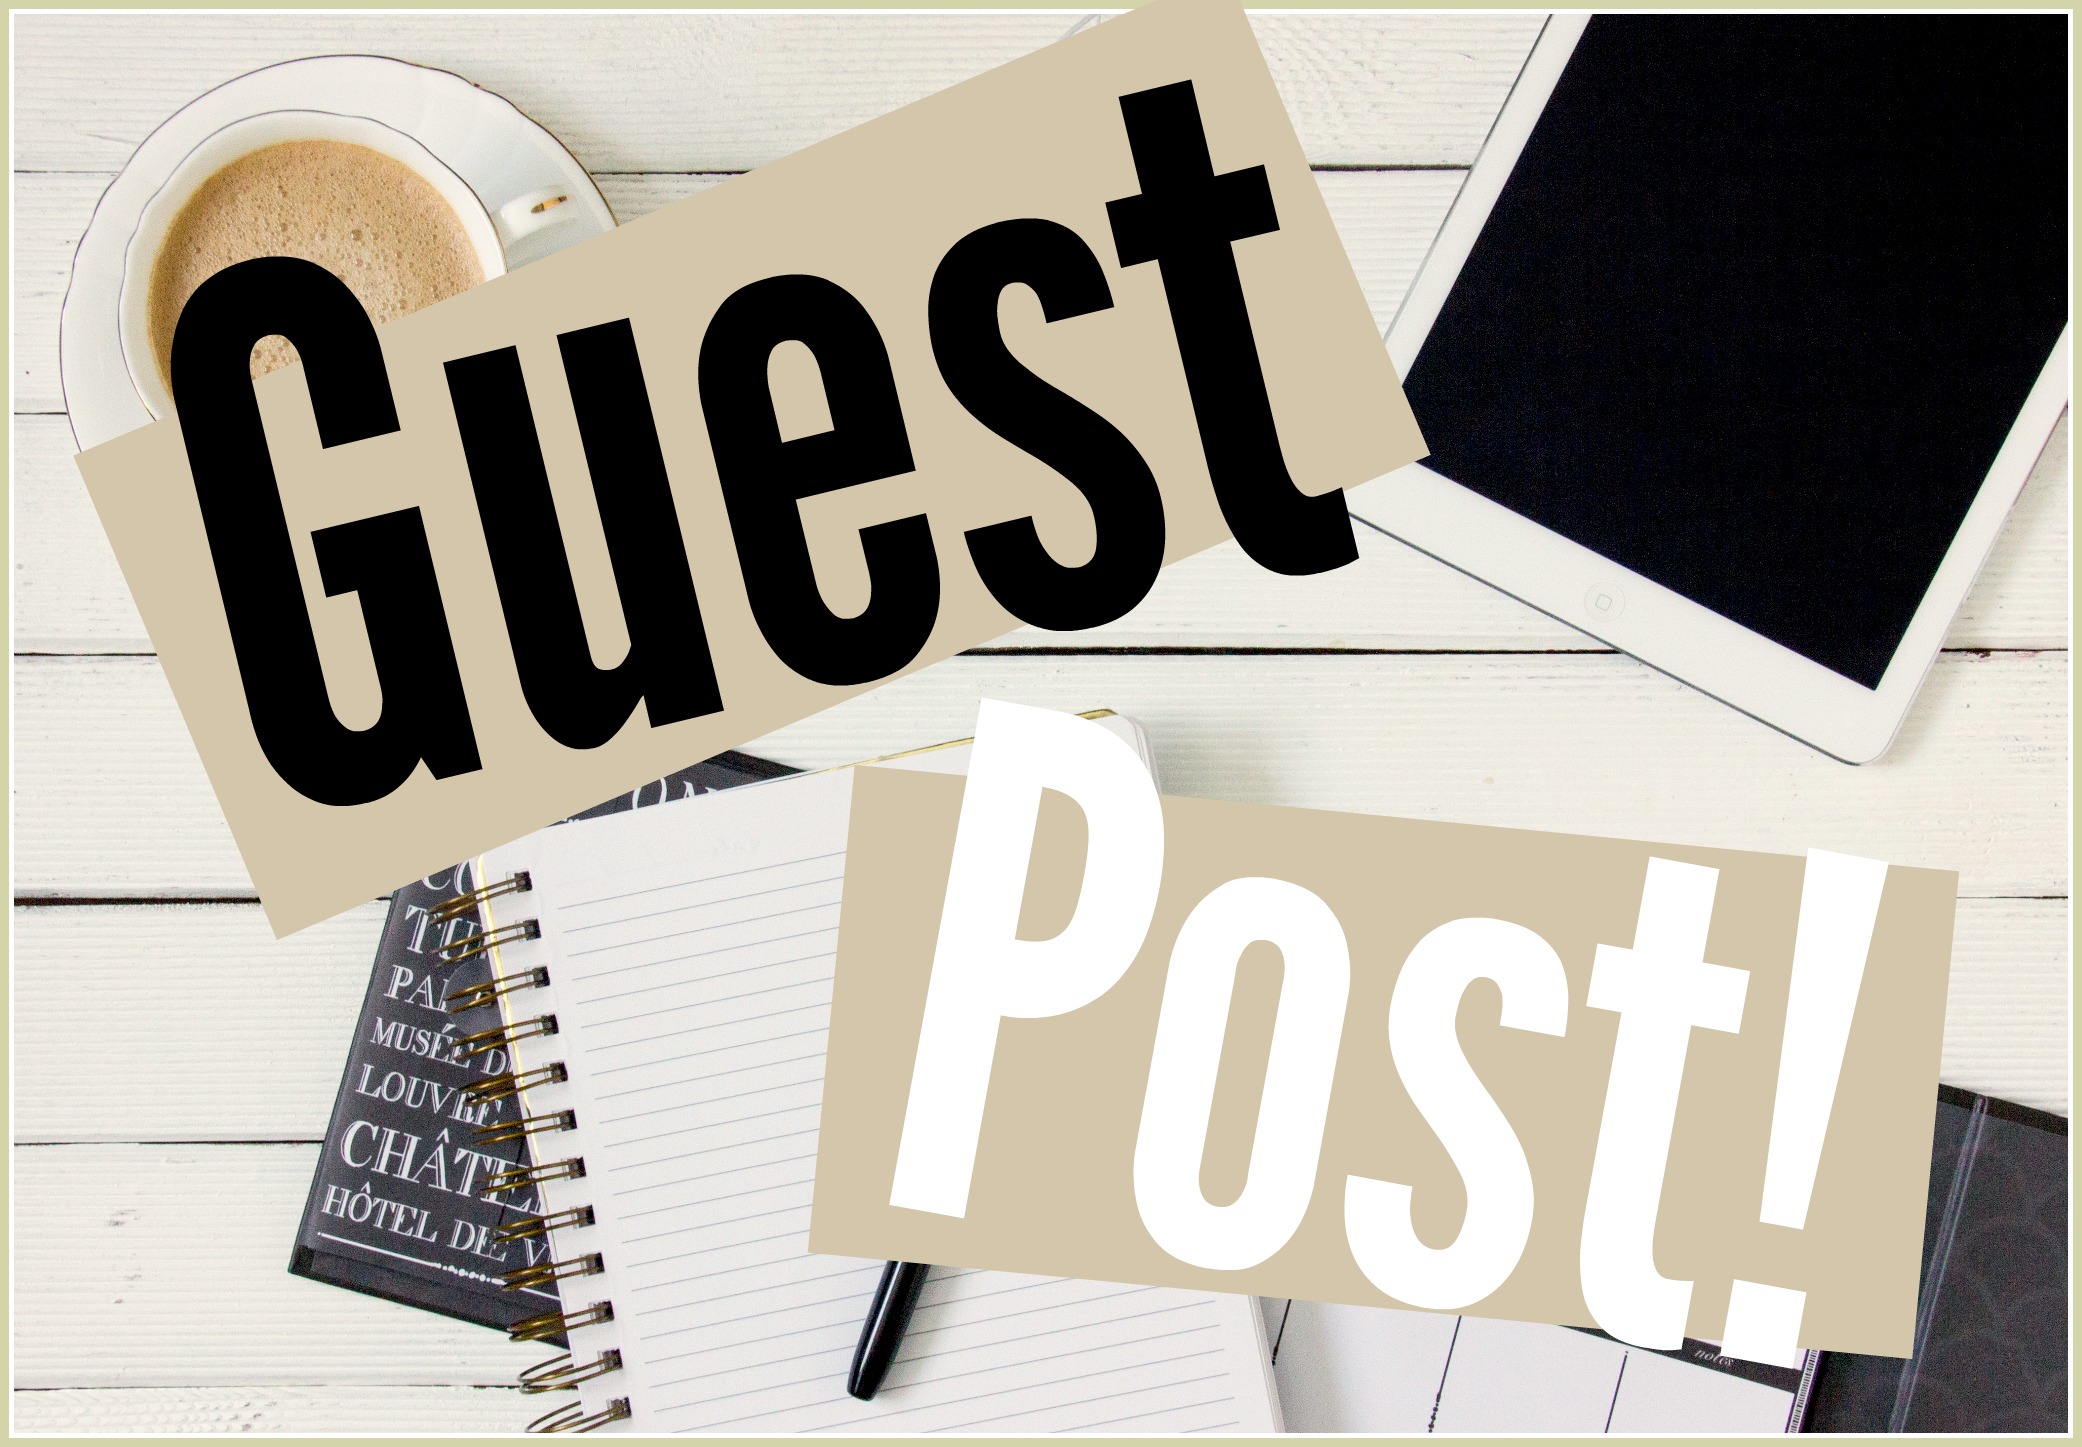 guest-post